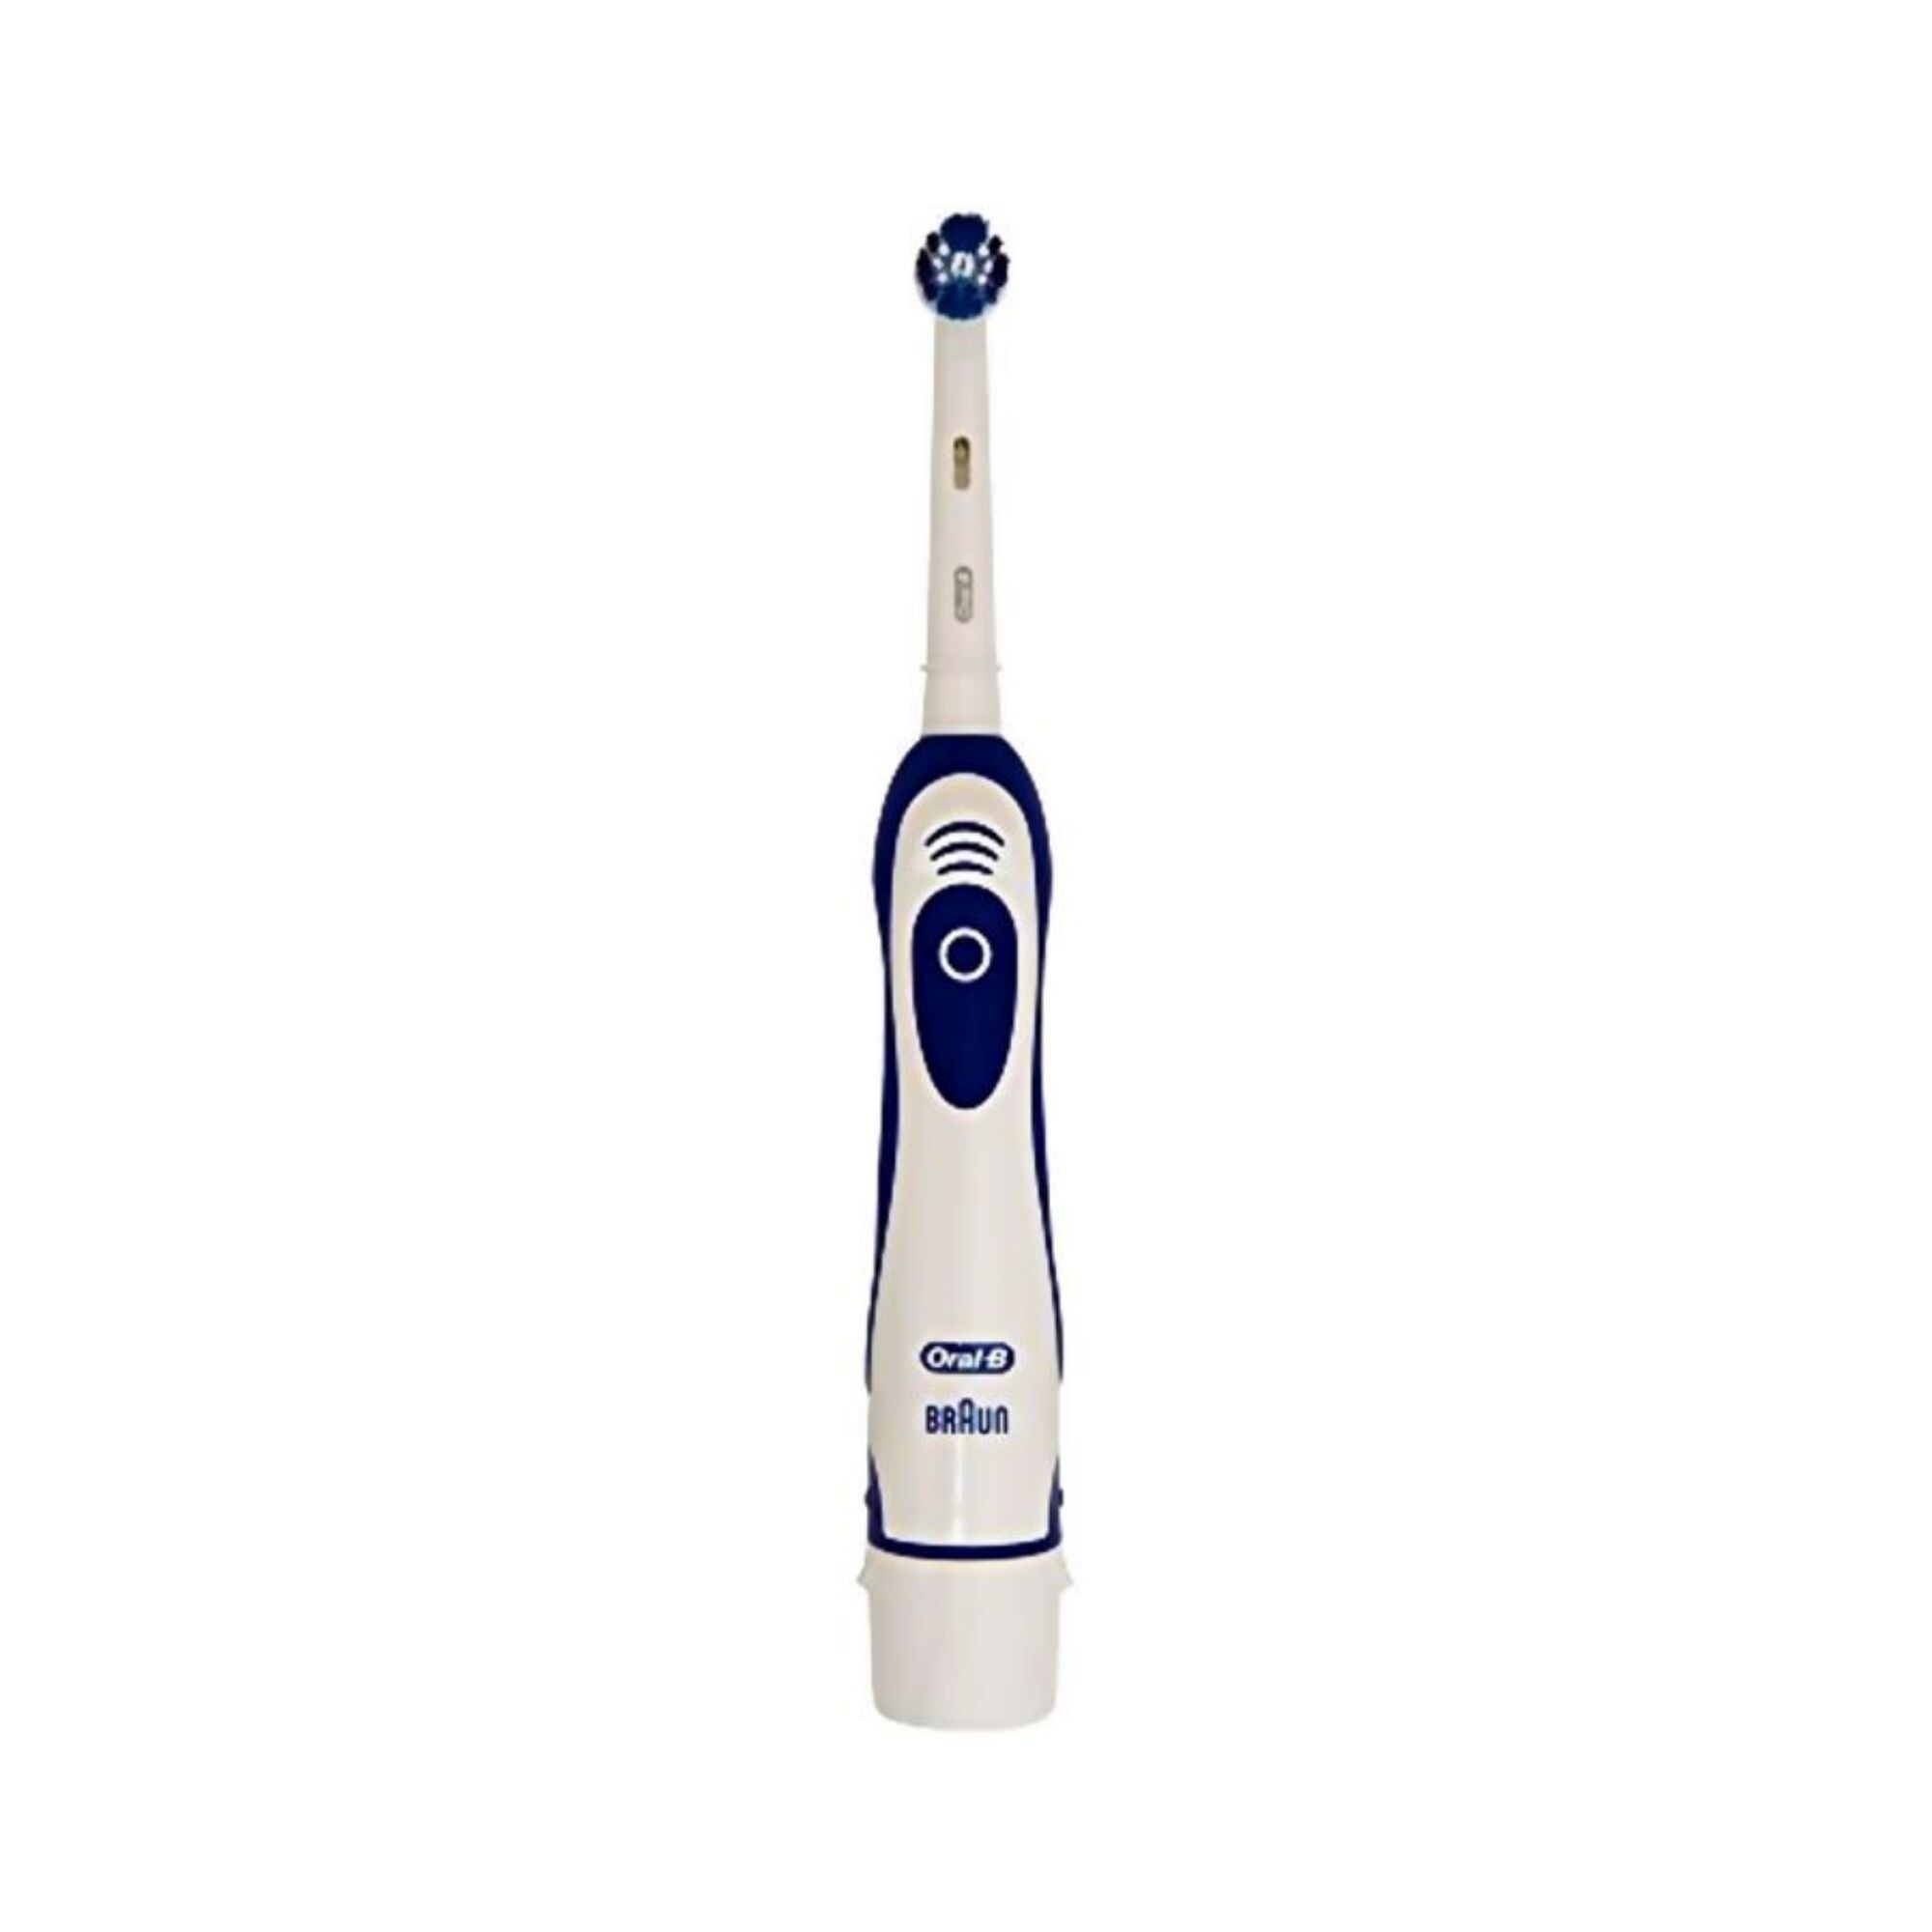 Oral-B Battery Powered Toothbrush, White and Blue